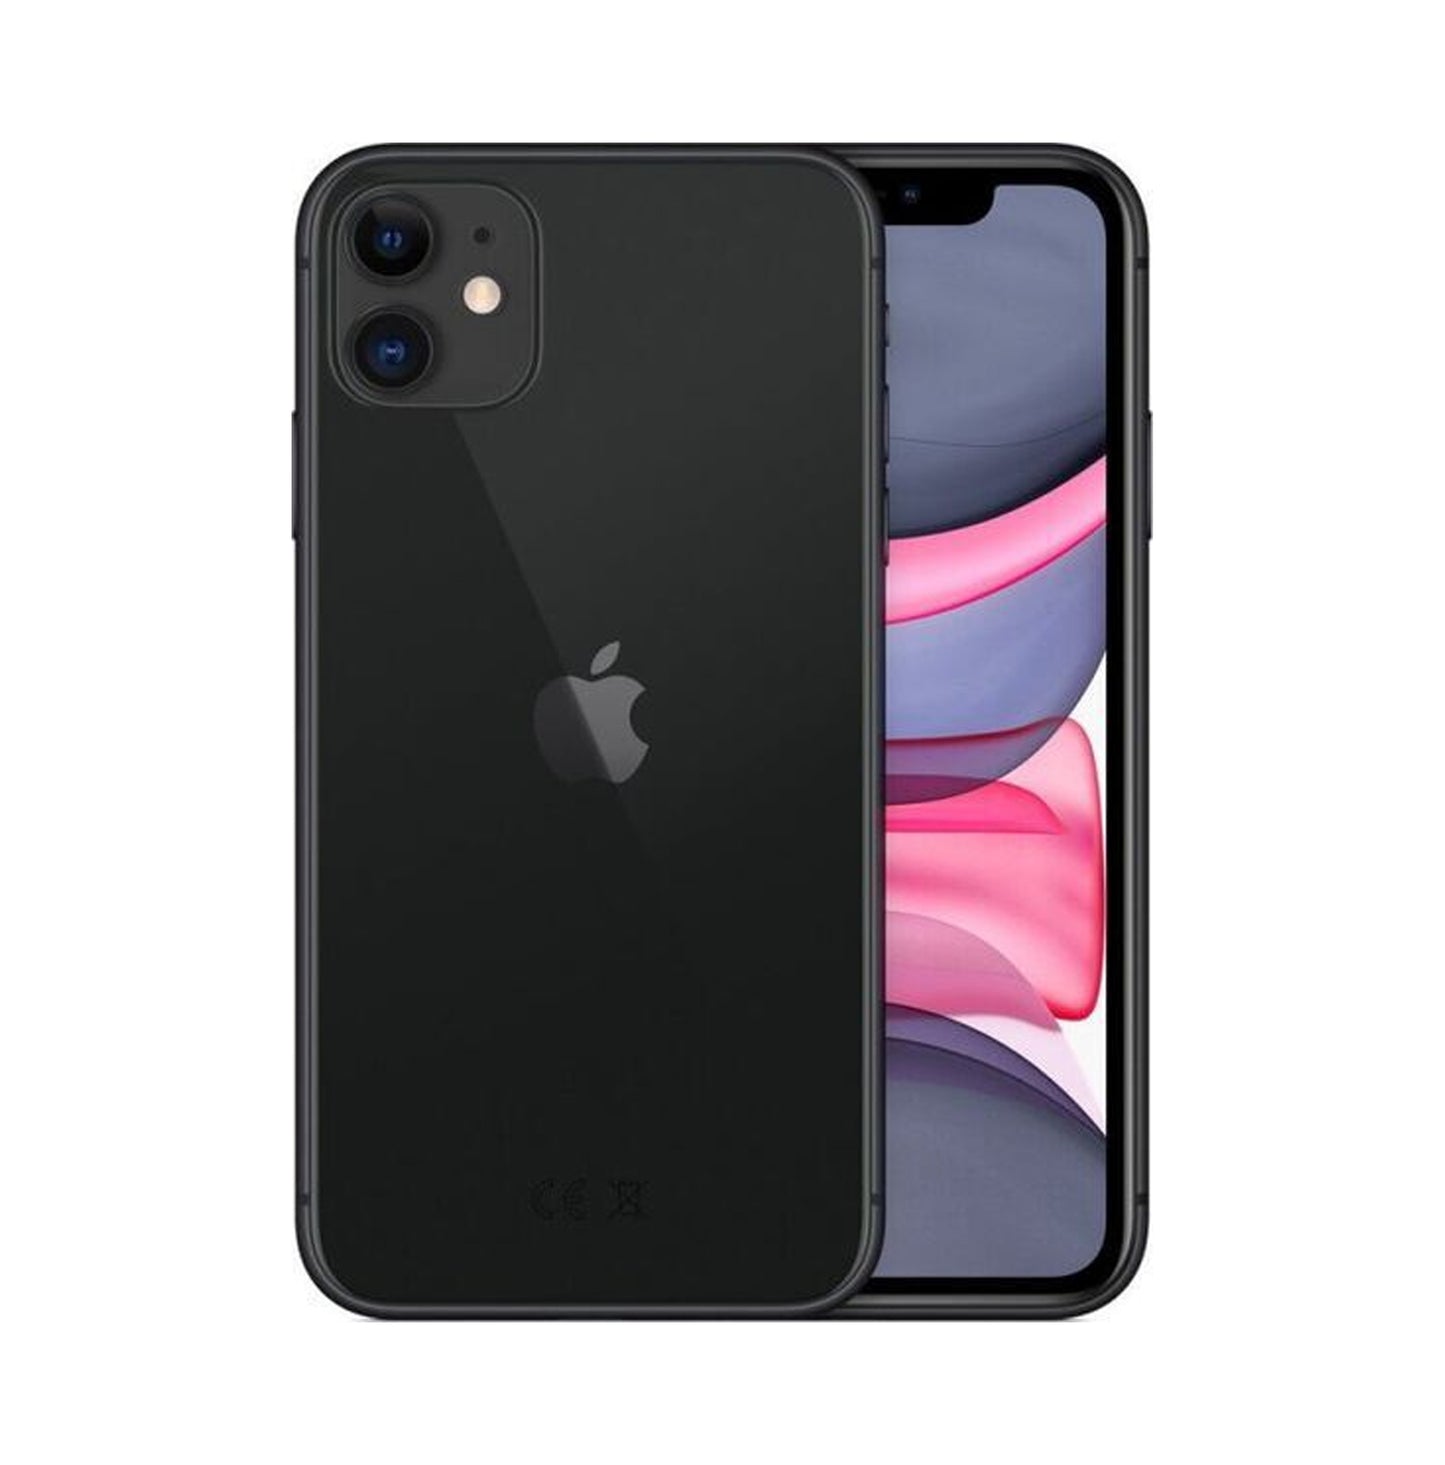 Used A-Grade iPhone 11 6.1" Mobile Phone 128GB Black